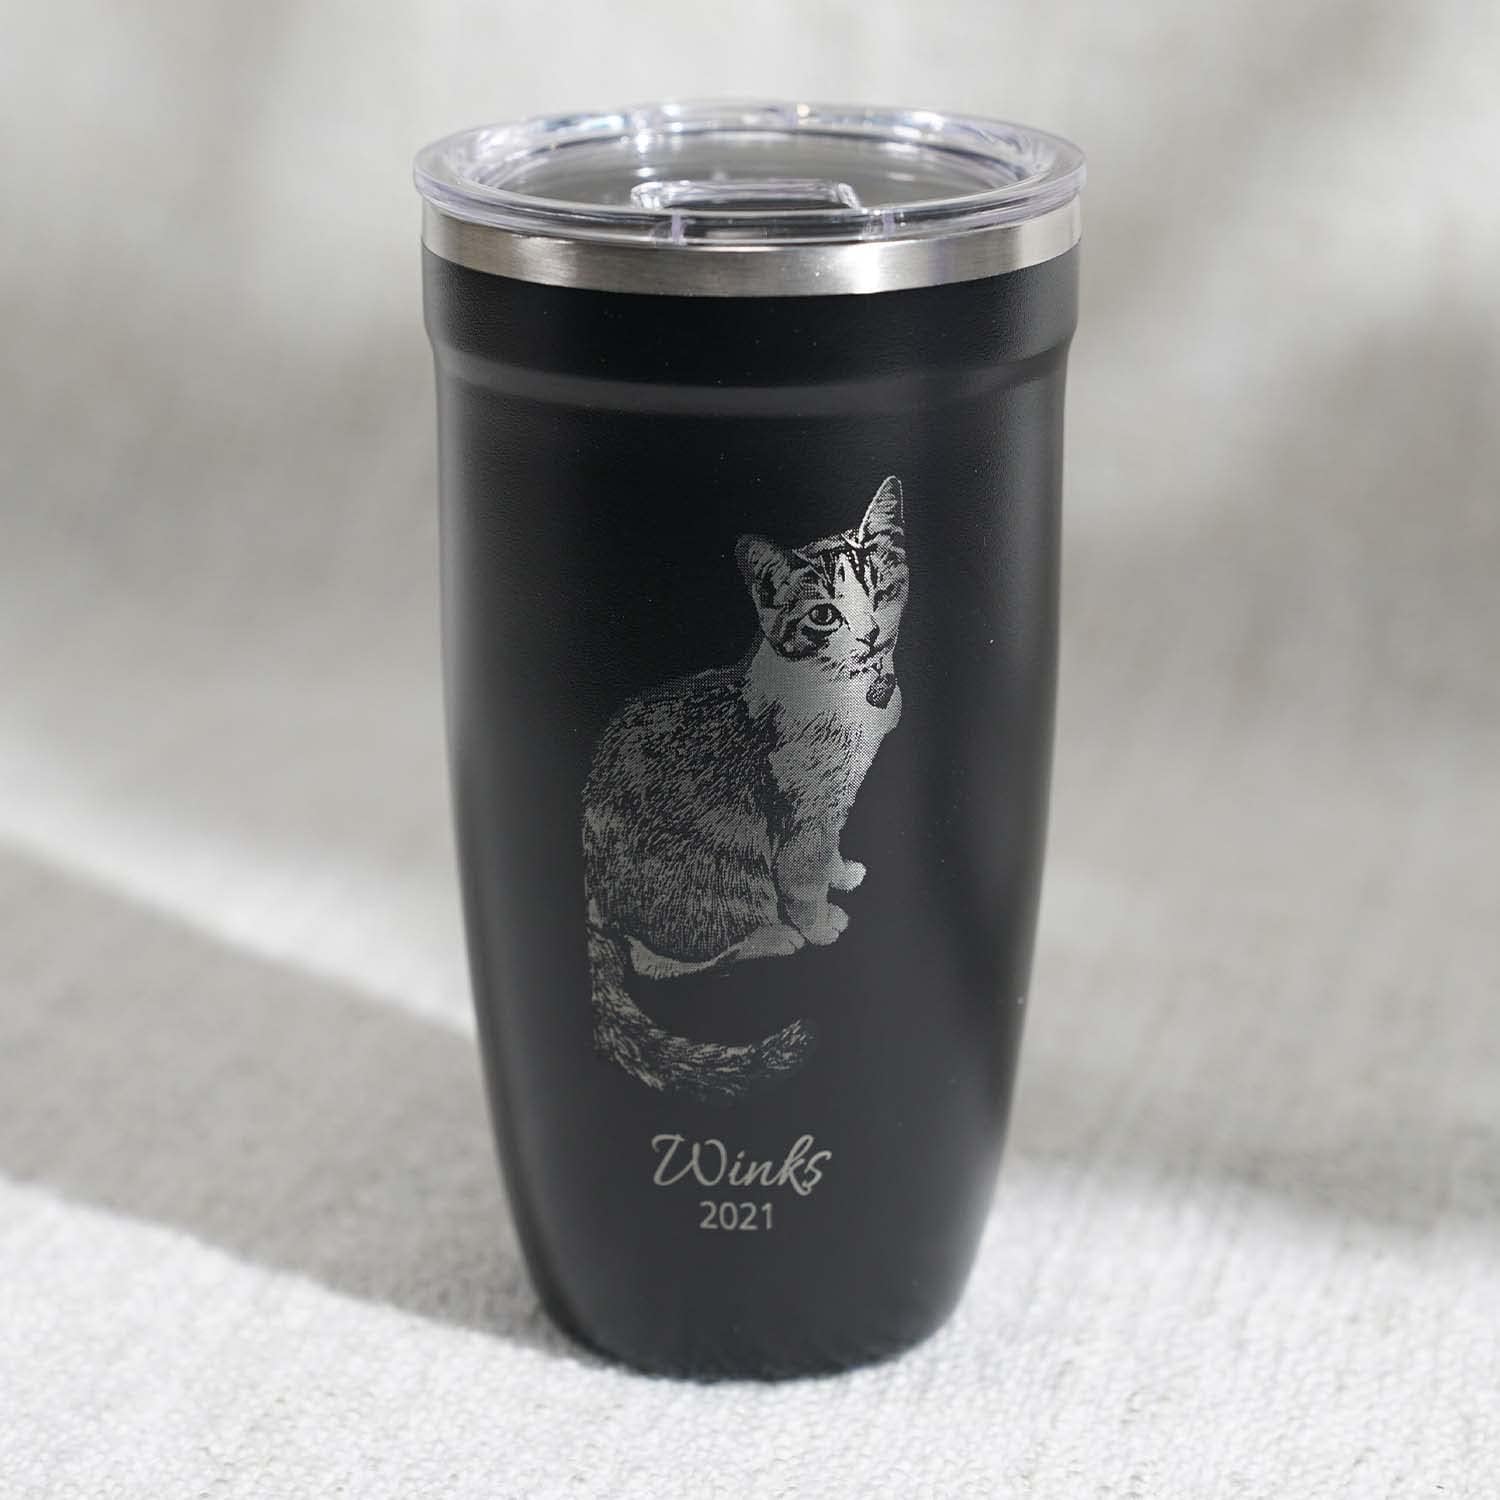 LAMOSE Personalized Black insulated tumbler with engraved cat face and text, ideal for custom drinkware and pet lovers